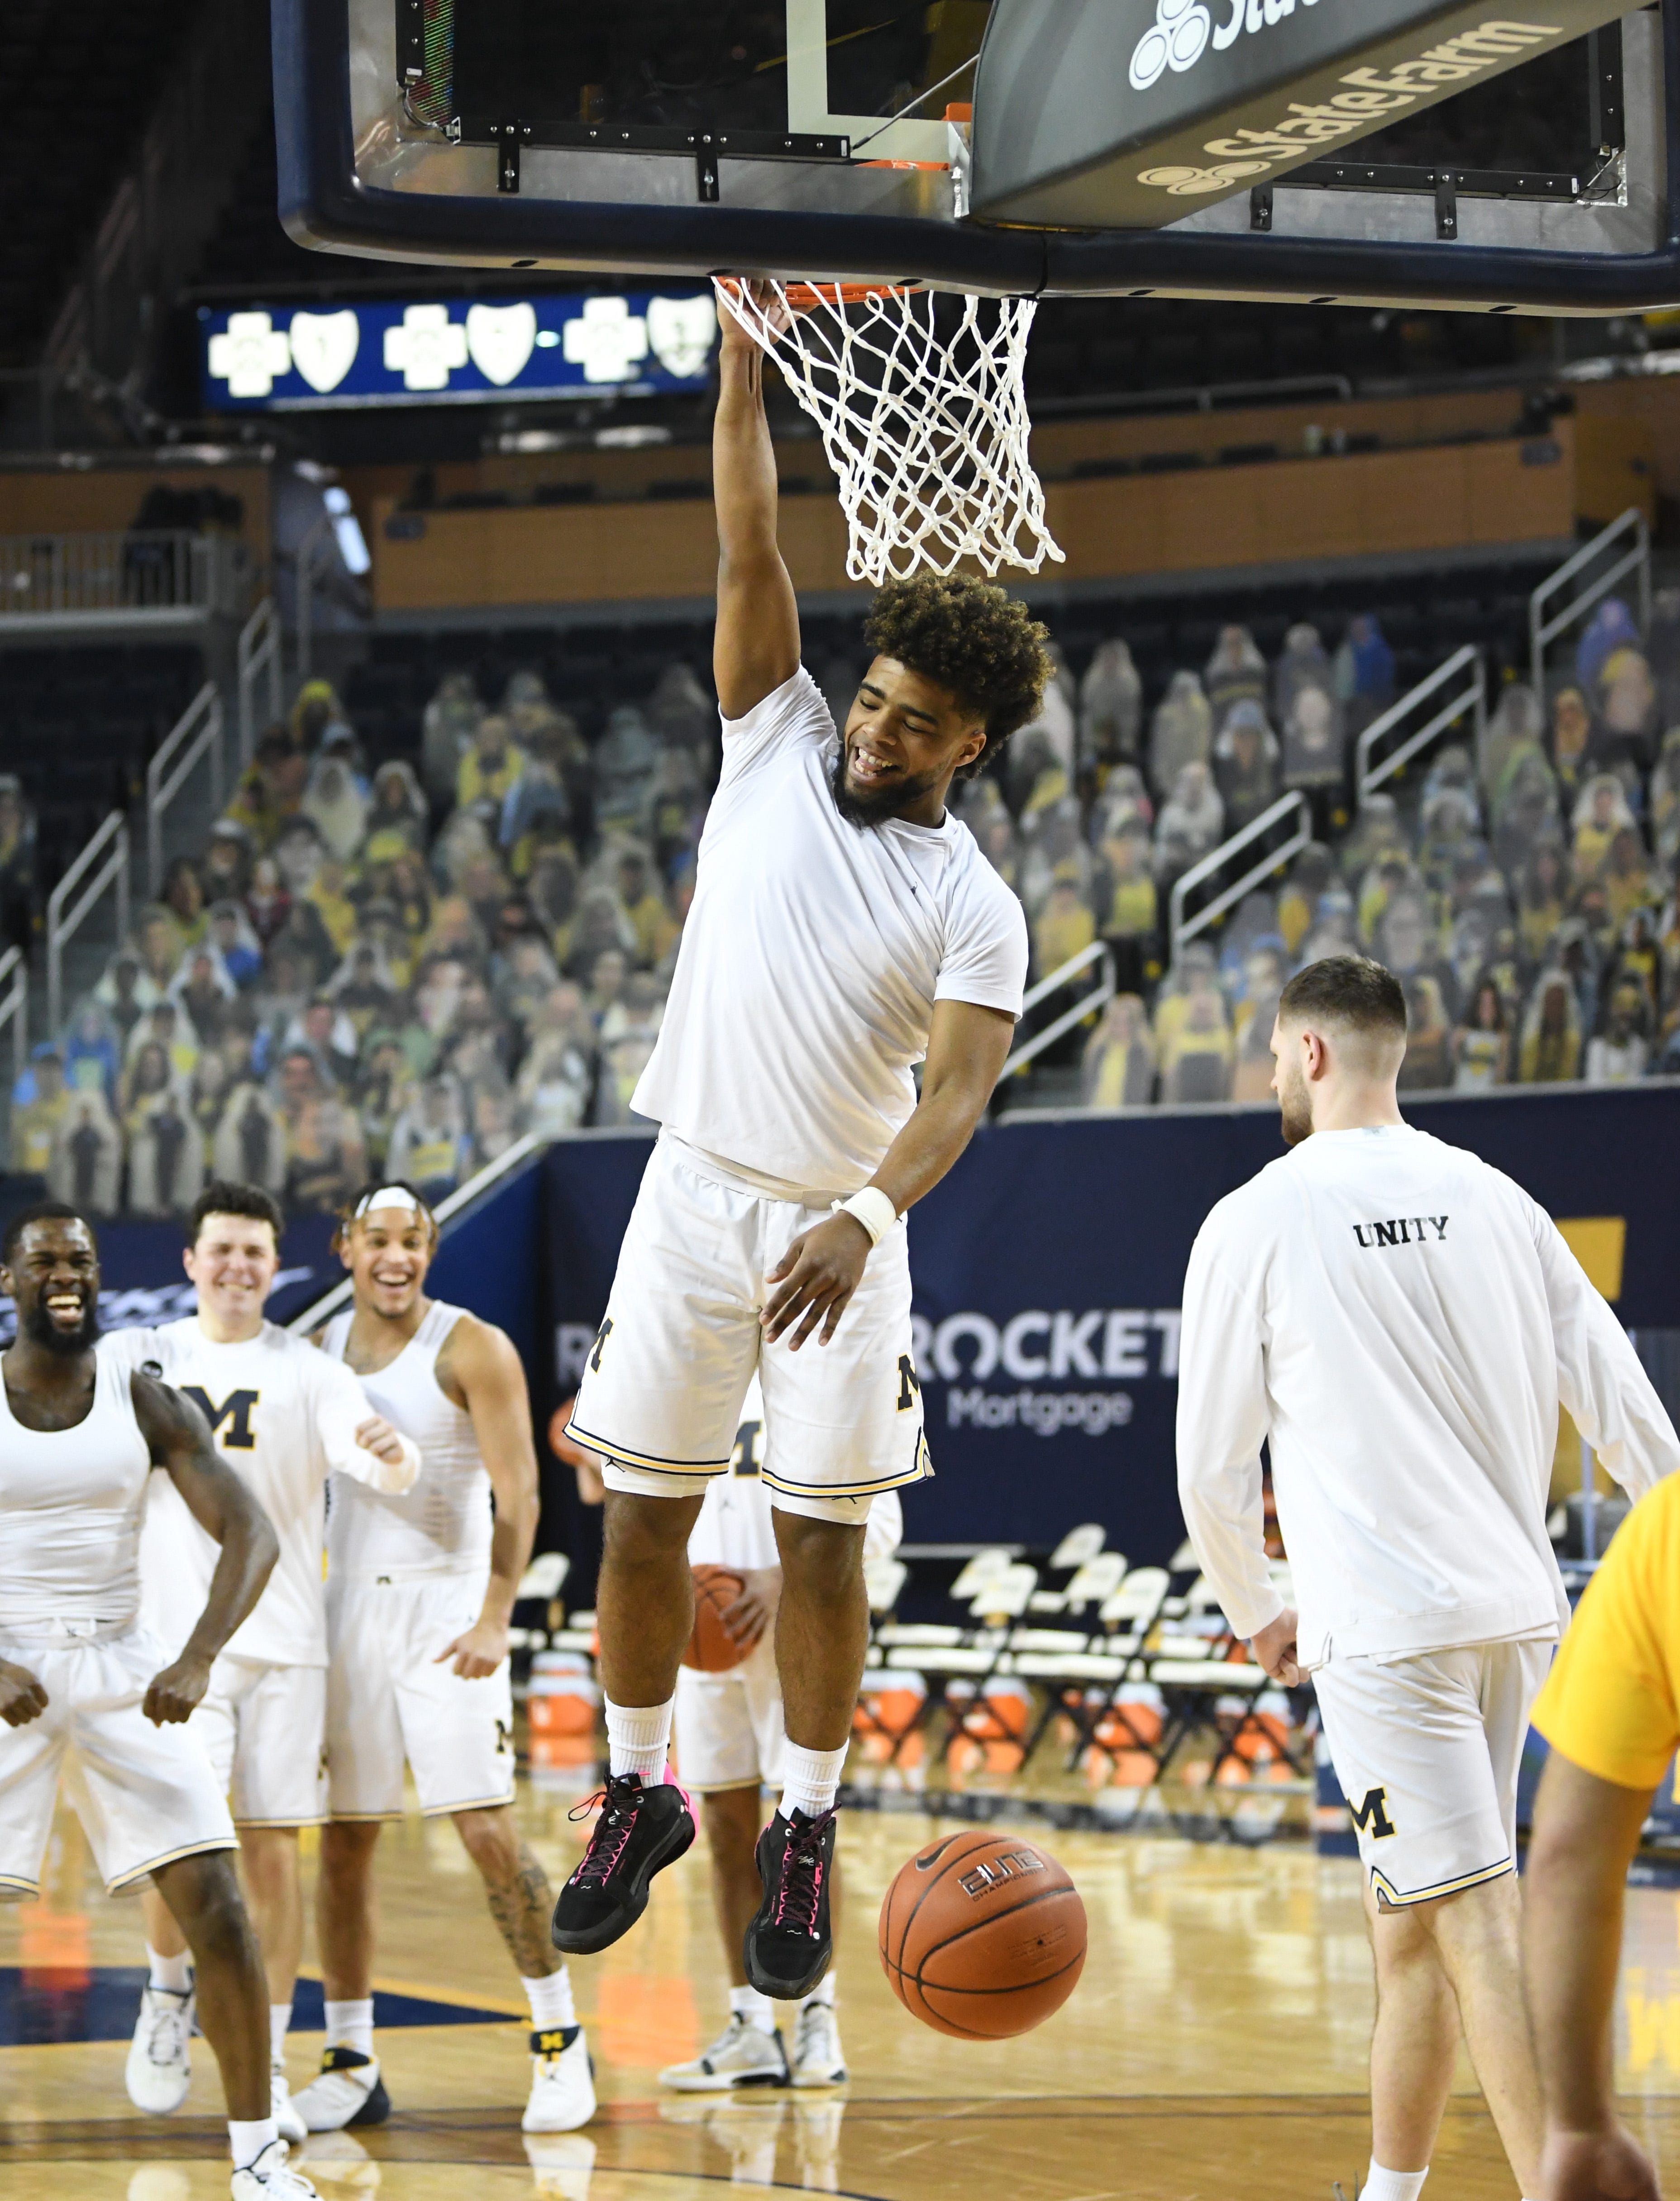 Michigan's Mike Davis onto the rim for awhile after dunking, with some help from his teammates at the end of warmups.